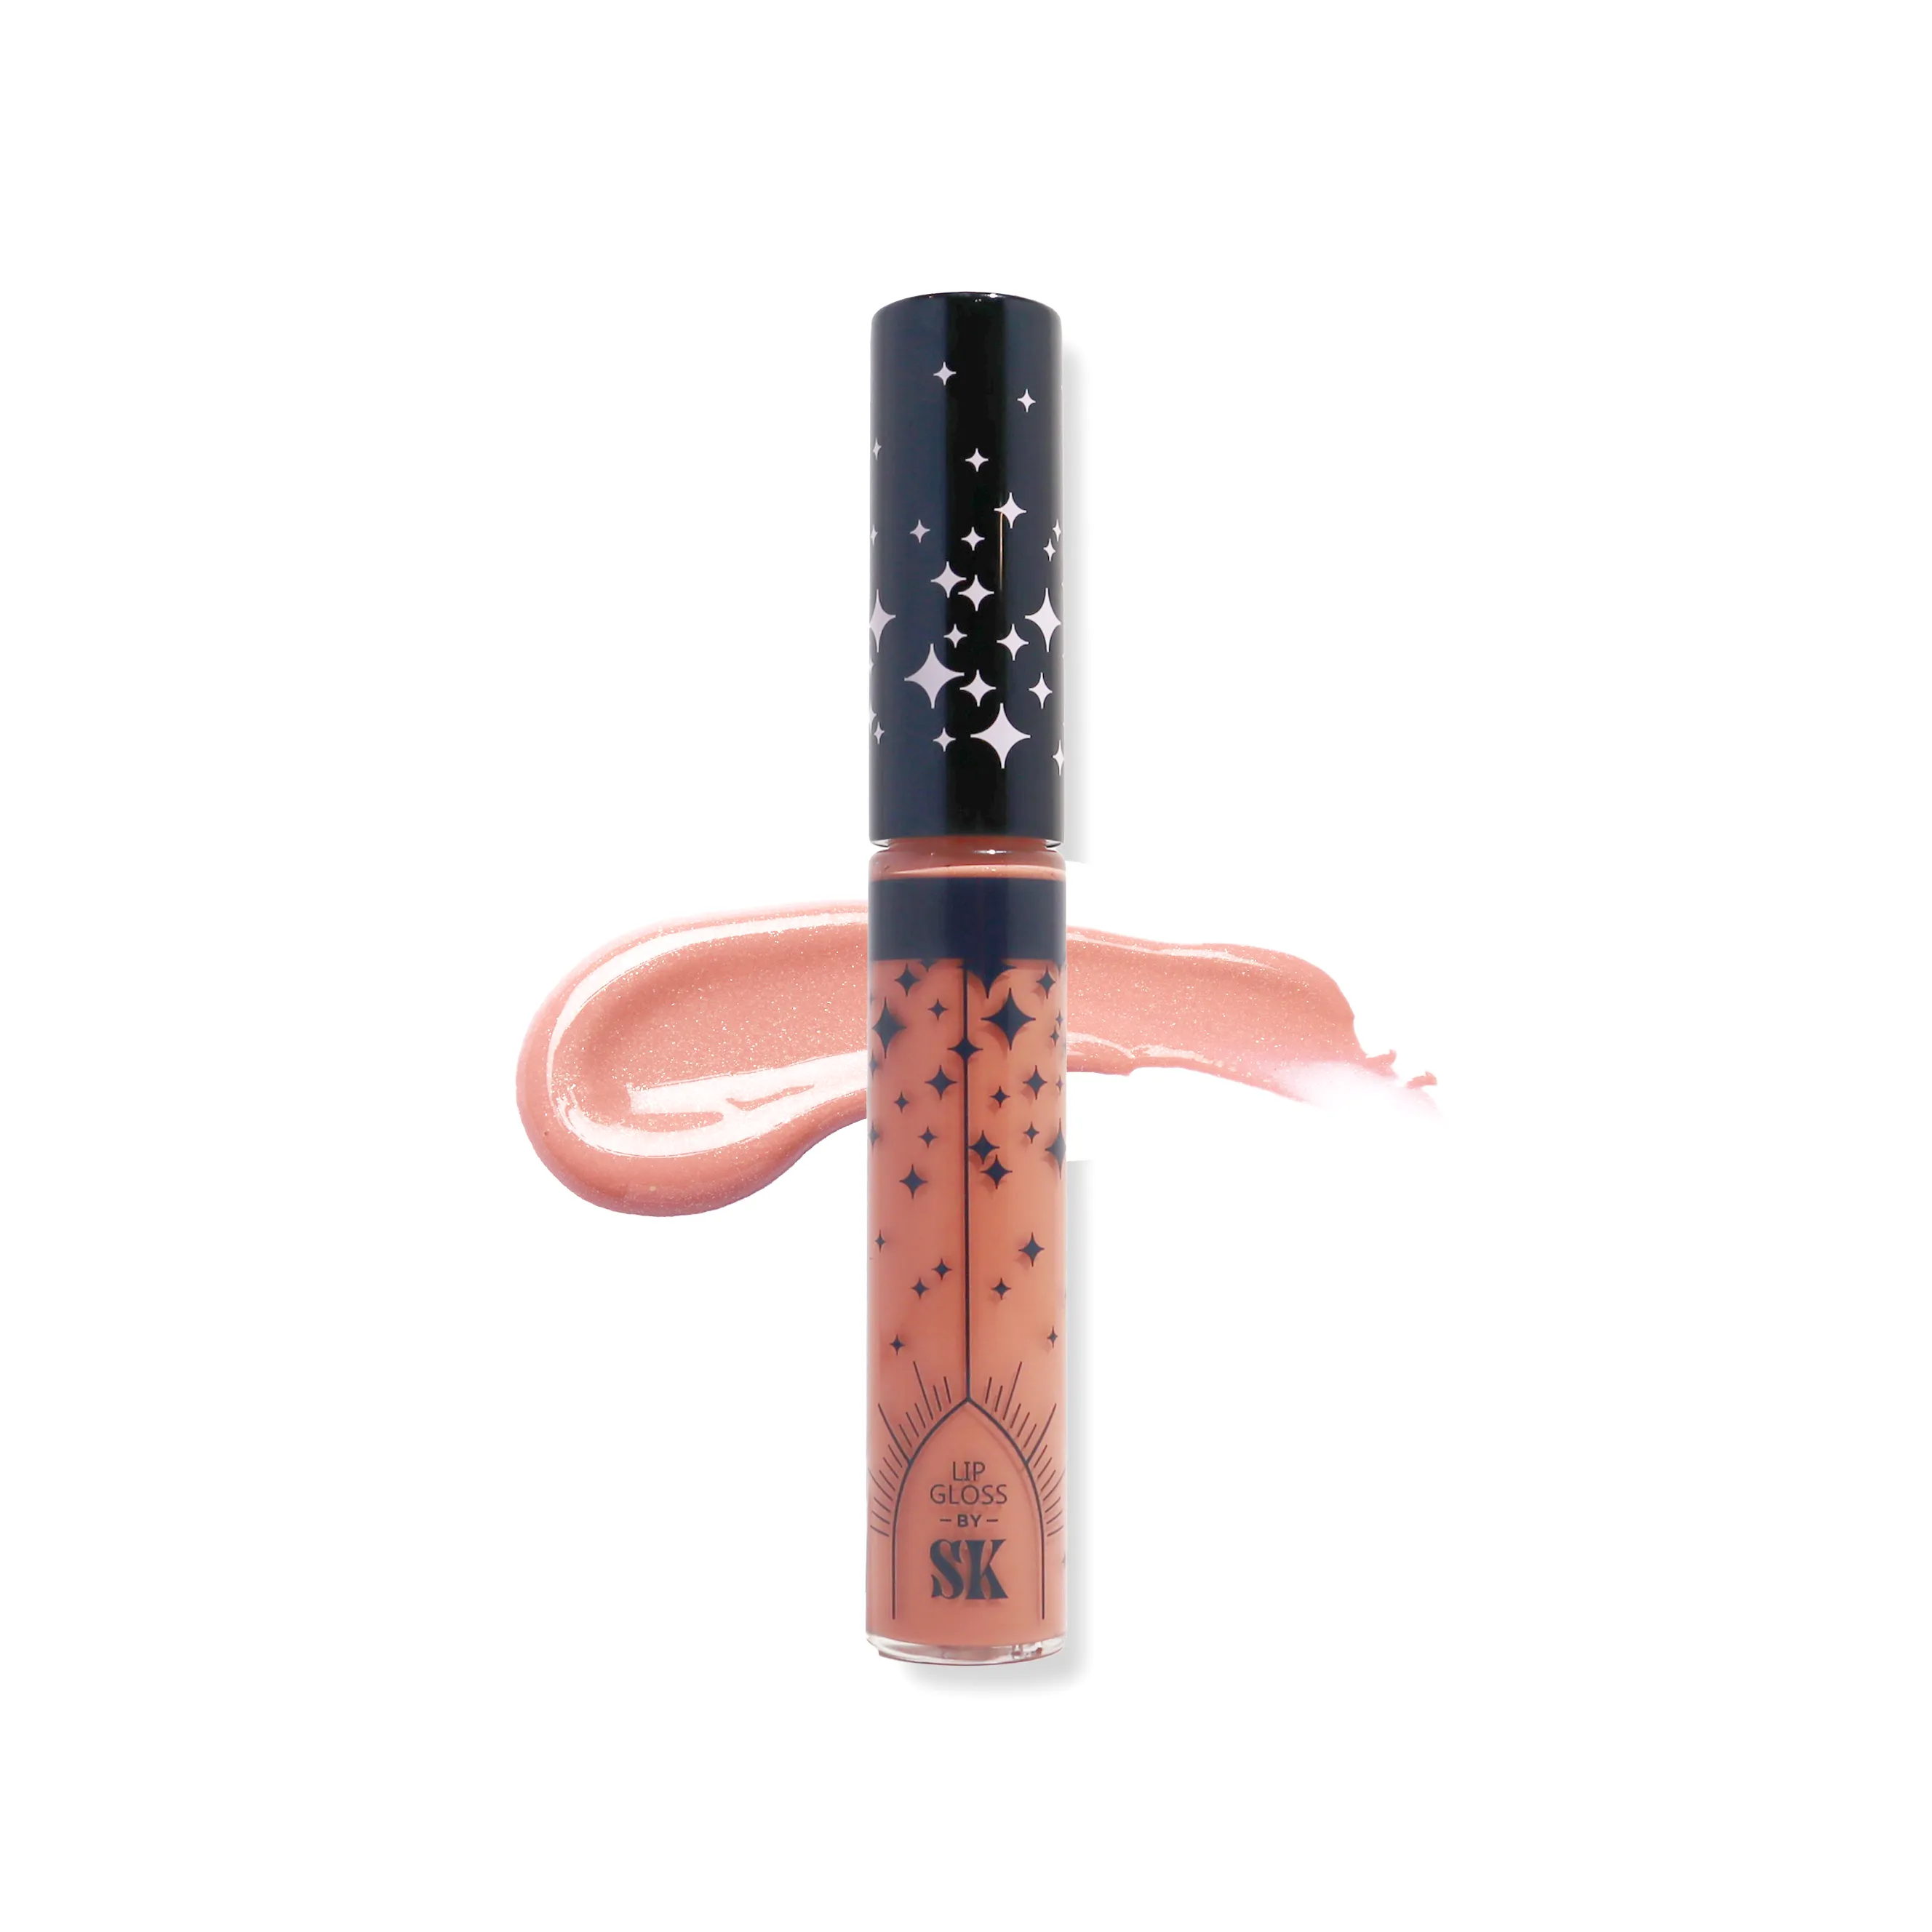 bysk-lip-gloss-level-up-with-swatch.webp